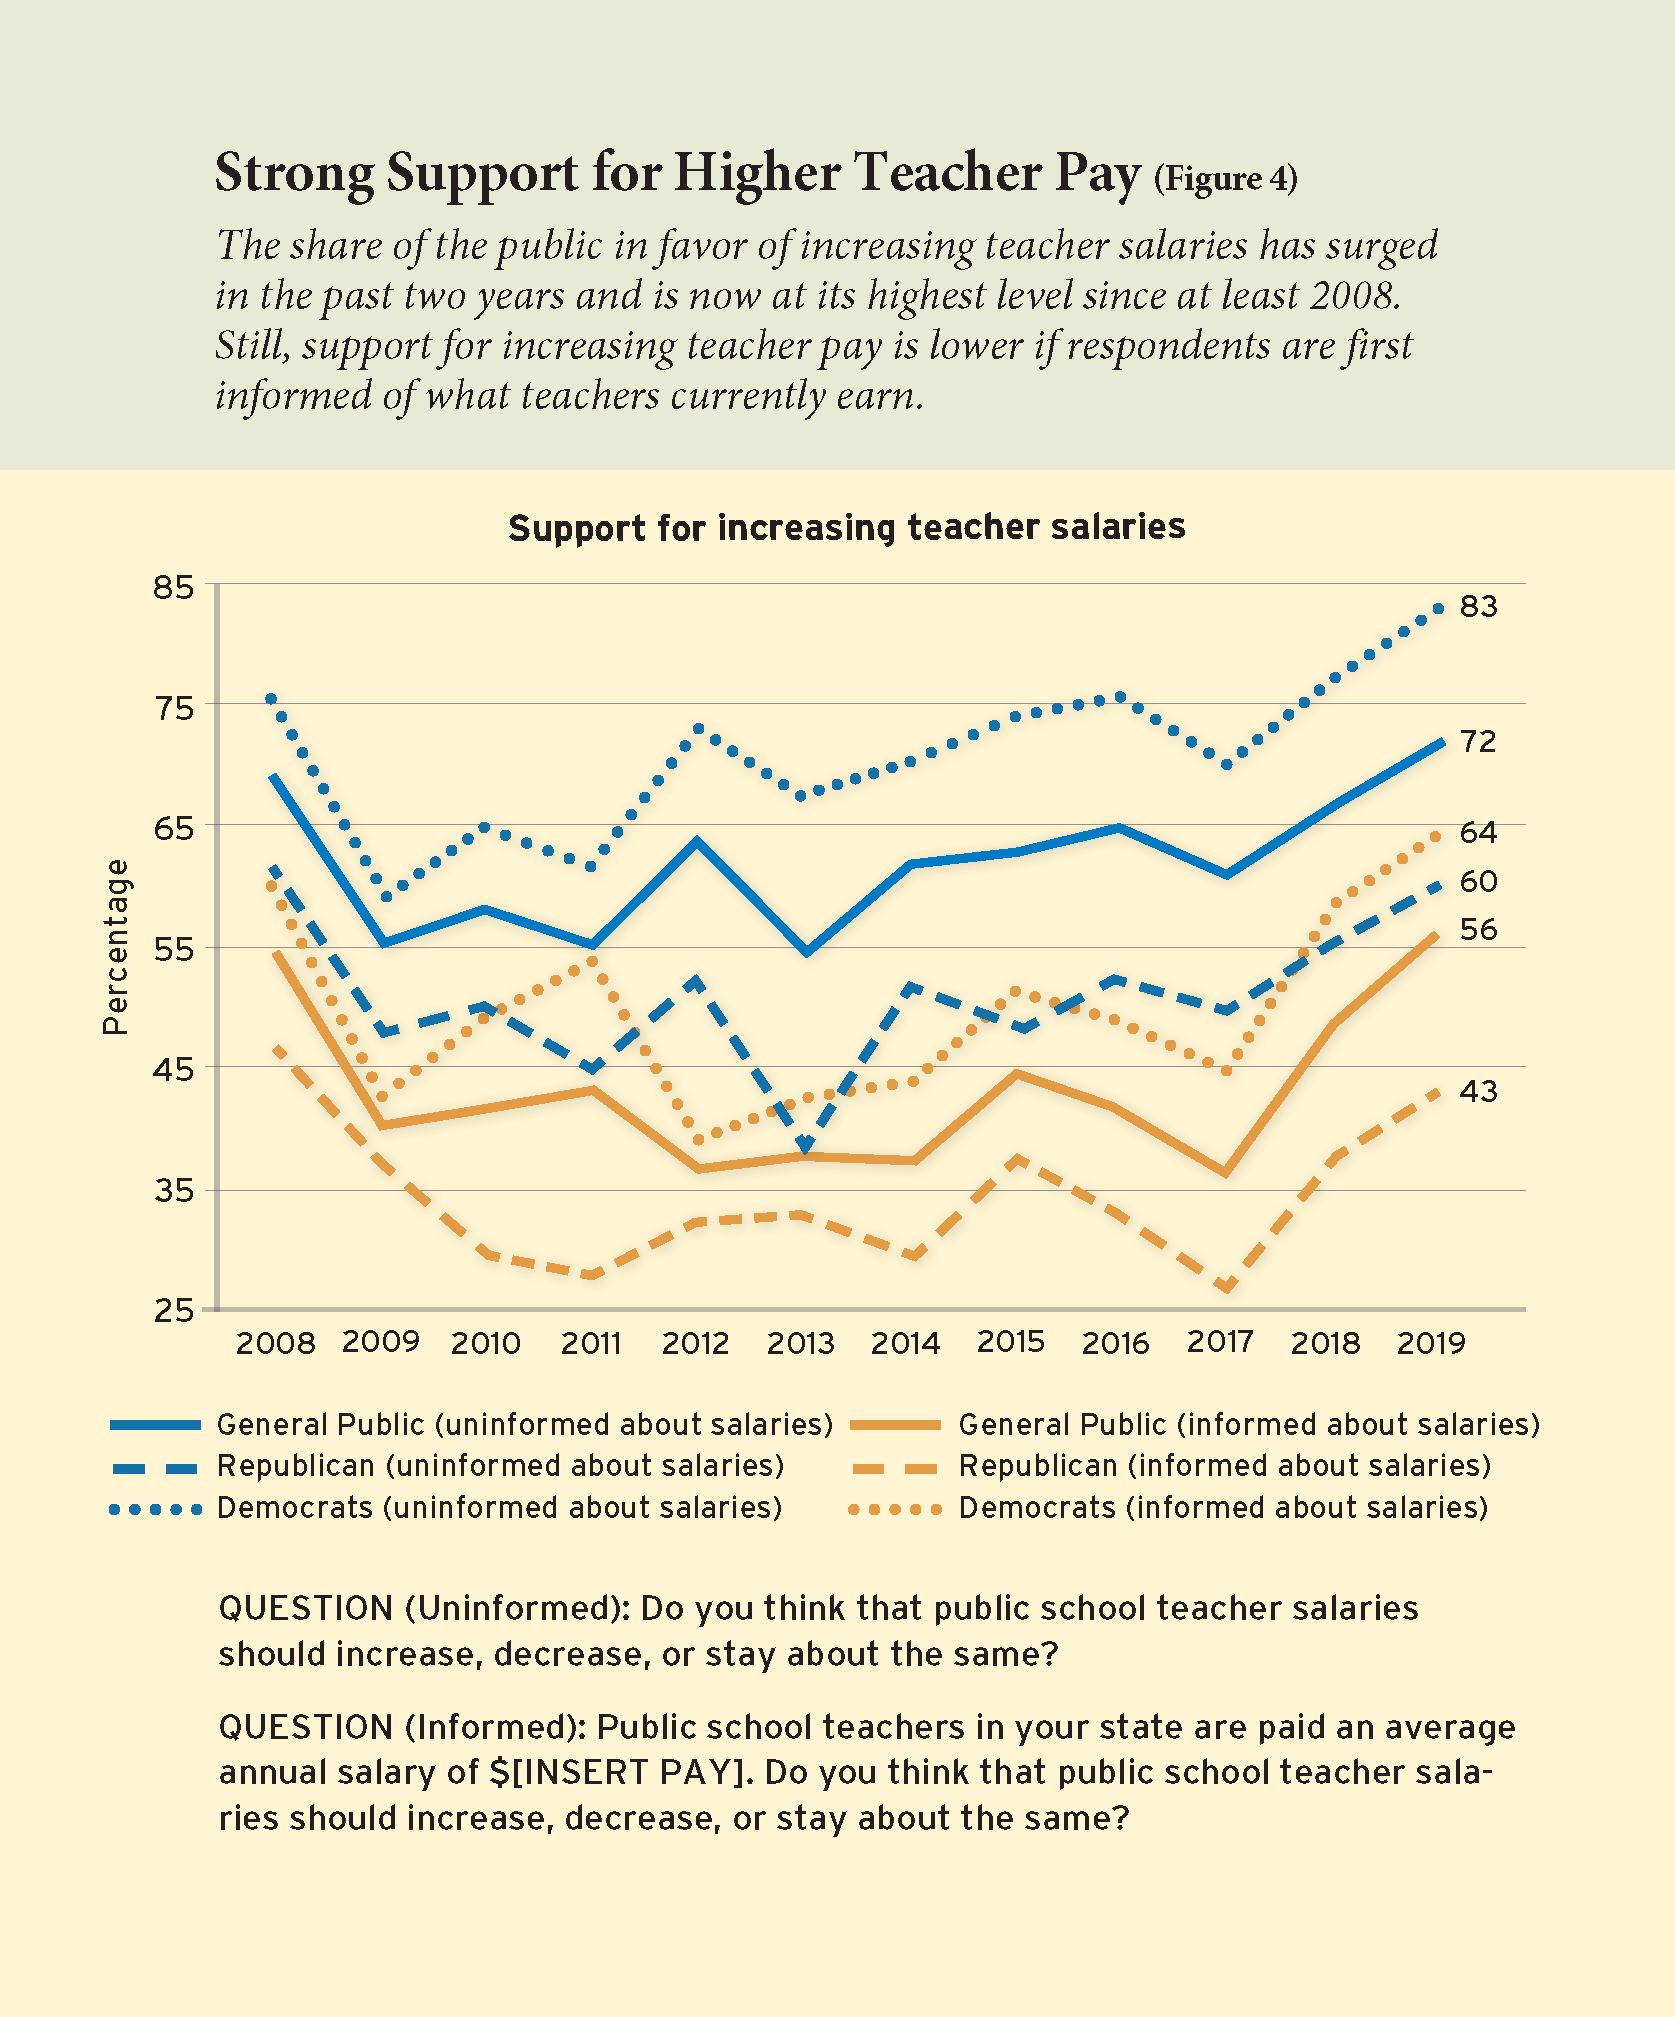 Strong Support for Higher Teacher Pay

The share of the public in favor of increasing teacher salaries has surged in the past two years and is now at its highest level since at least 2008. Still, support for increasing teacher pay is lower if respondents are first informed of what teachers currently earn.